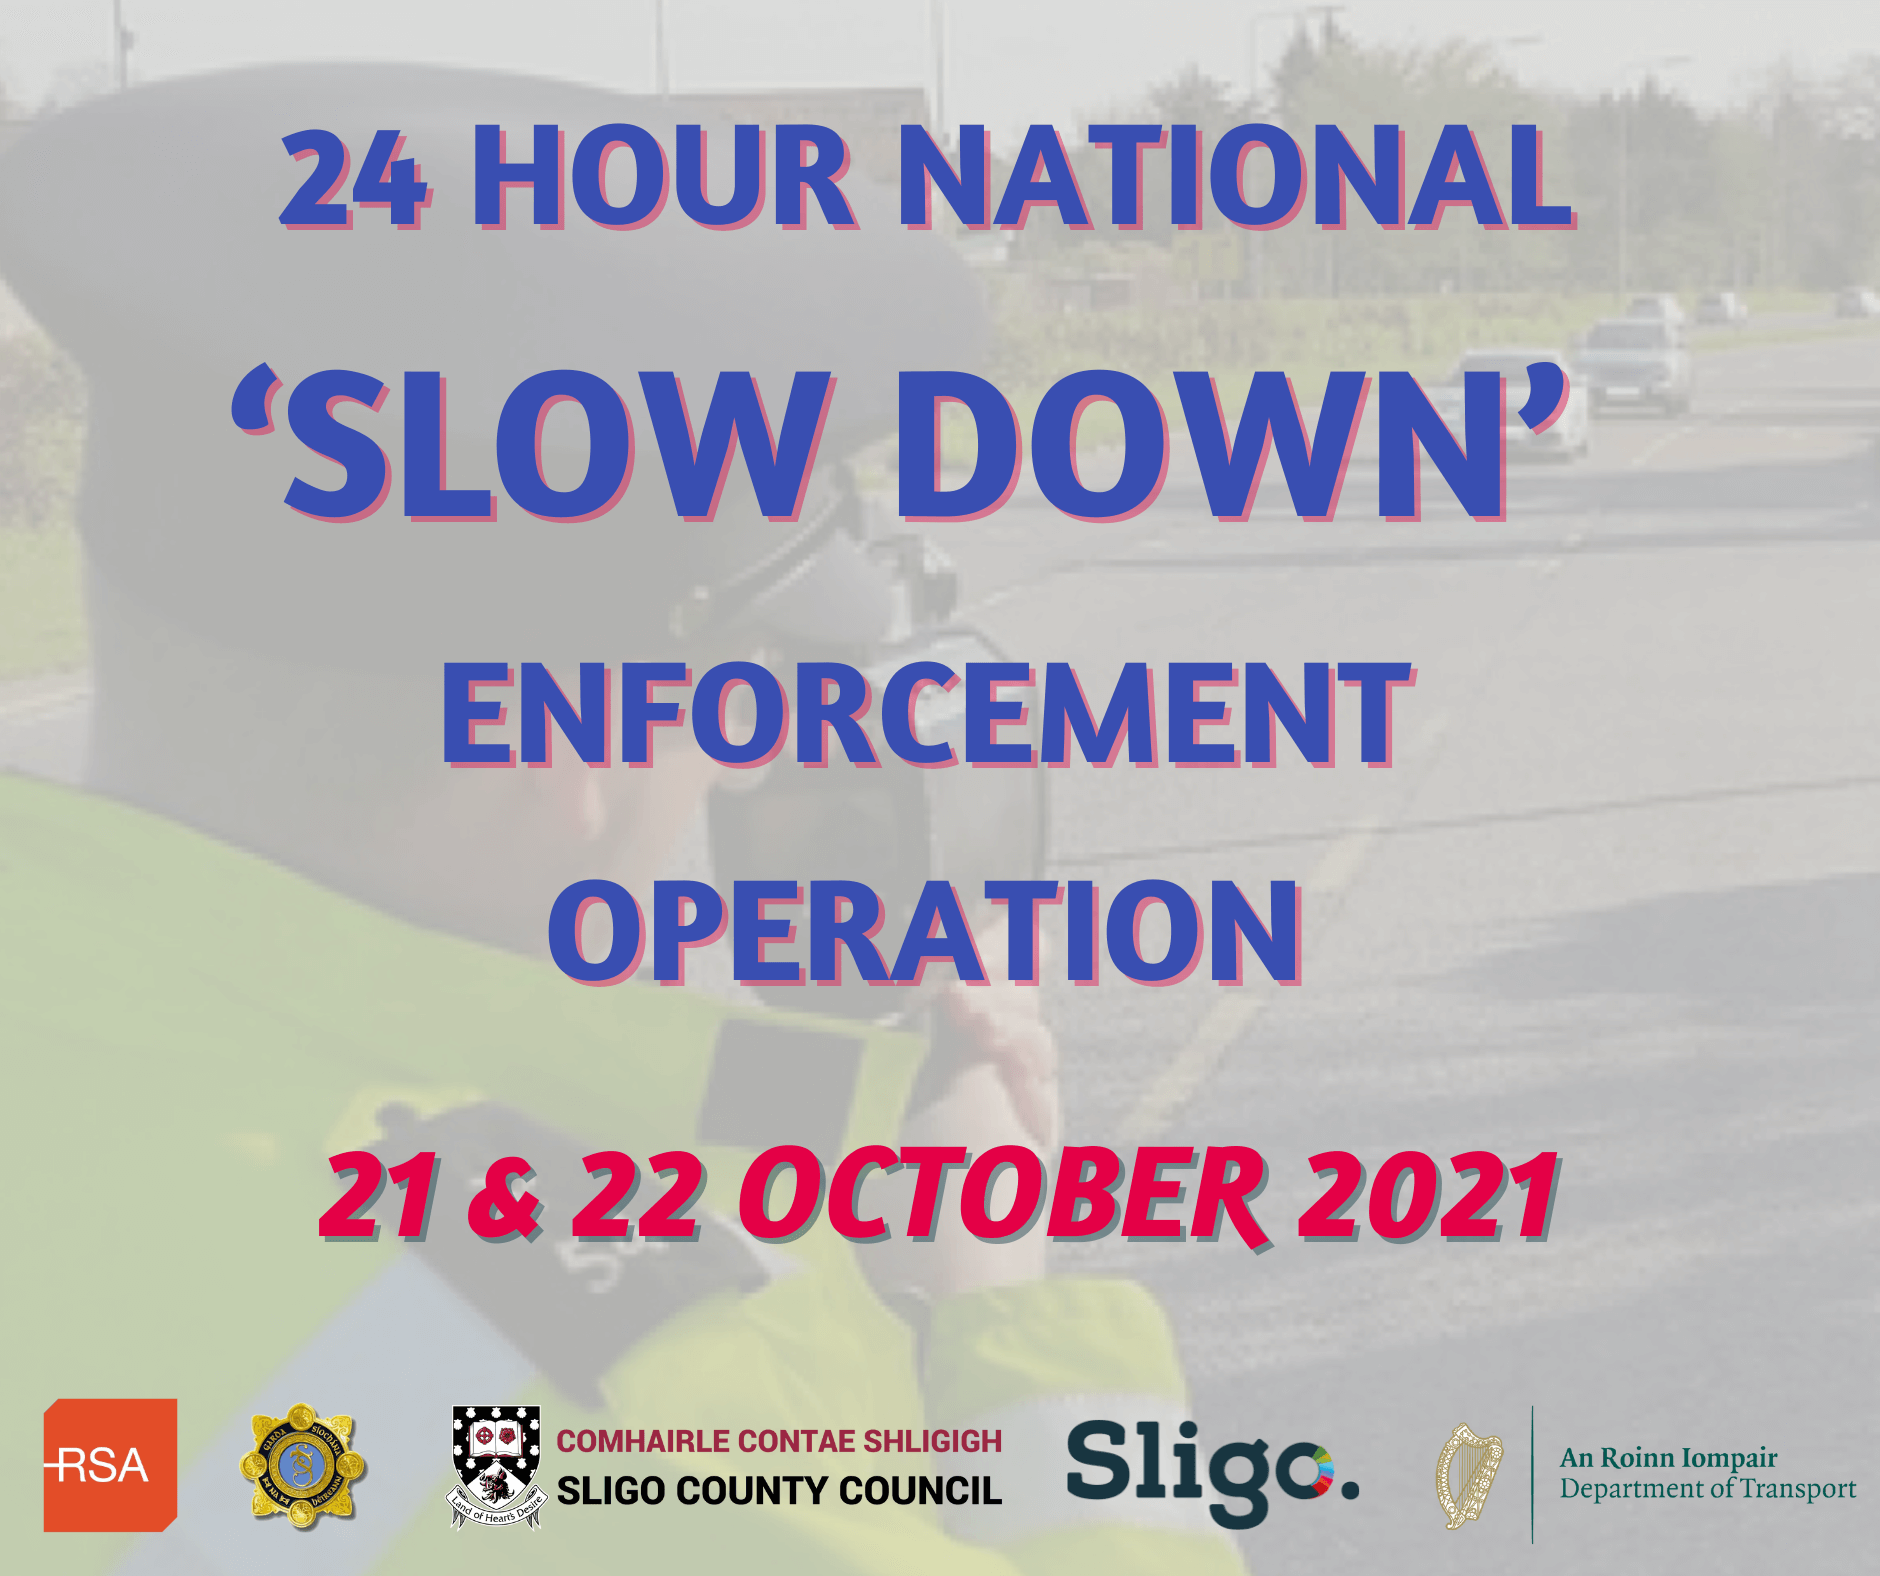 24 hour National ‘Slow Down’ Enforcement Operation - 21 & 22 October 2021